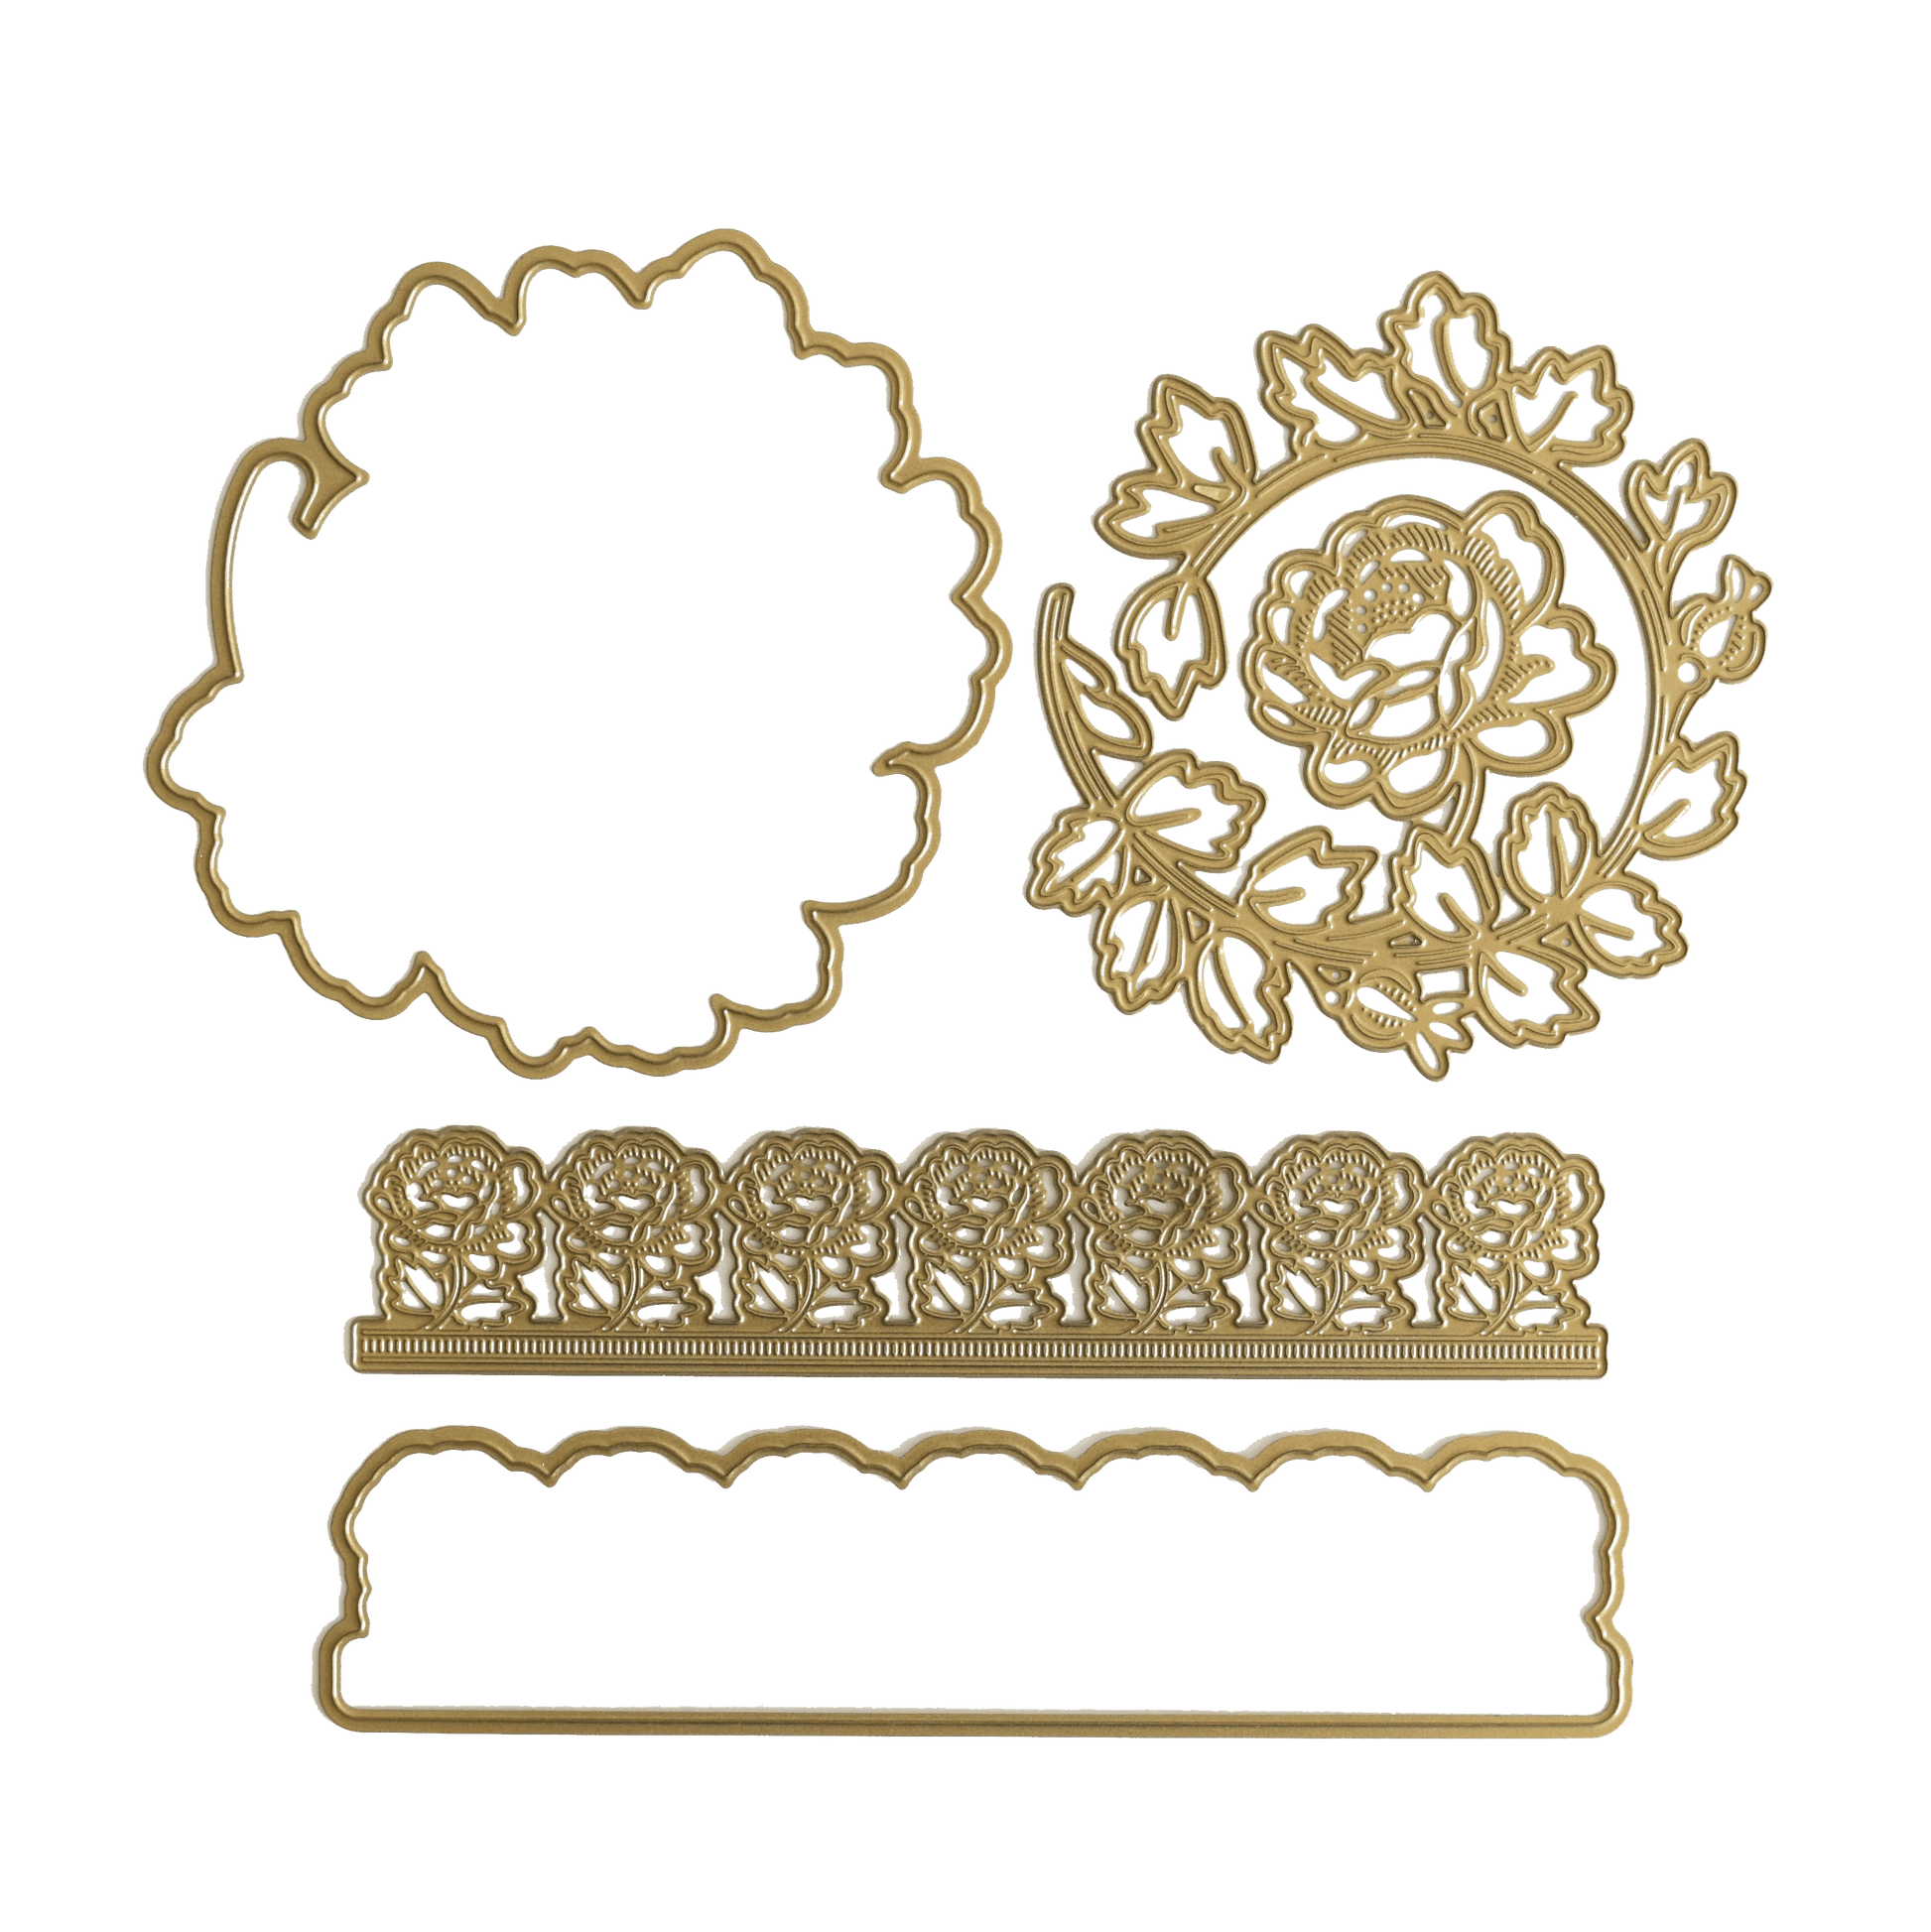 a green background with a gold frame and a decorative design.